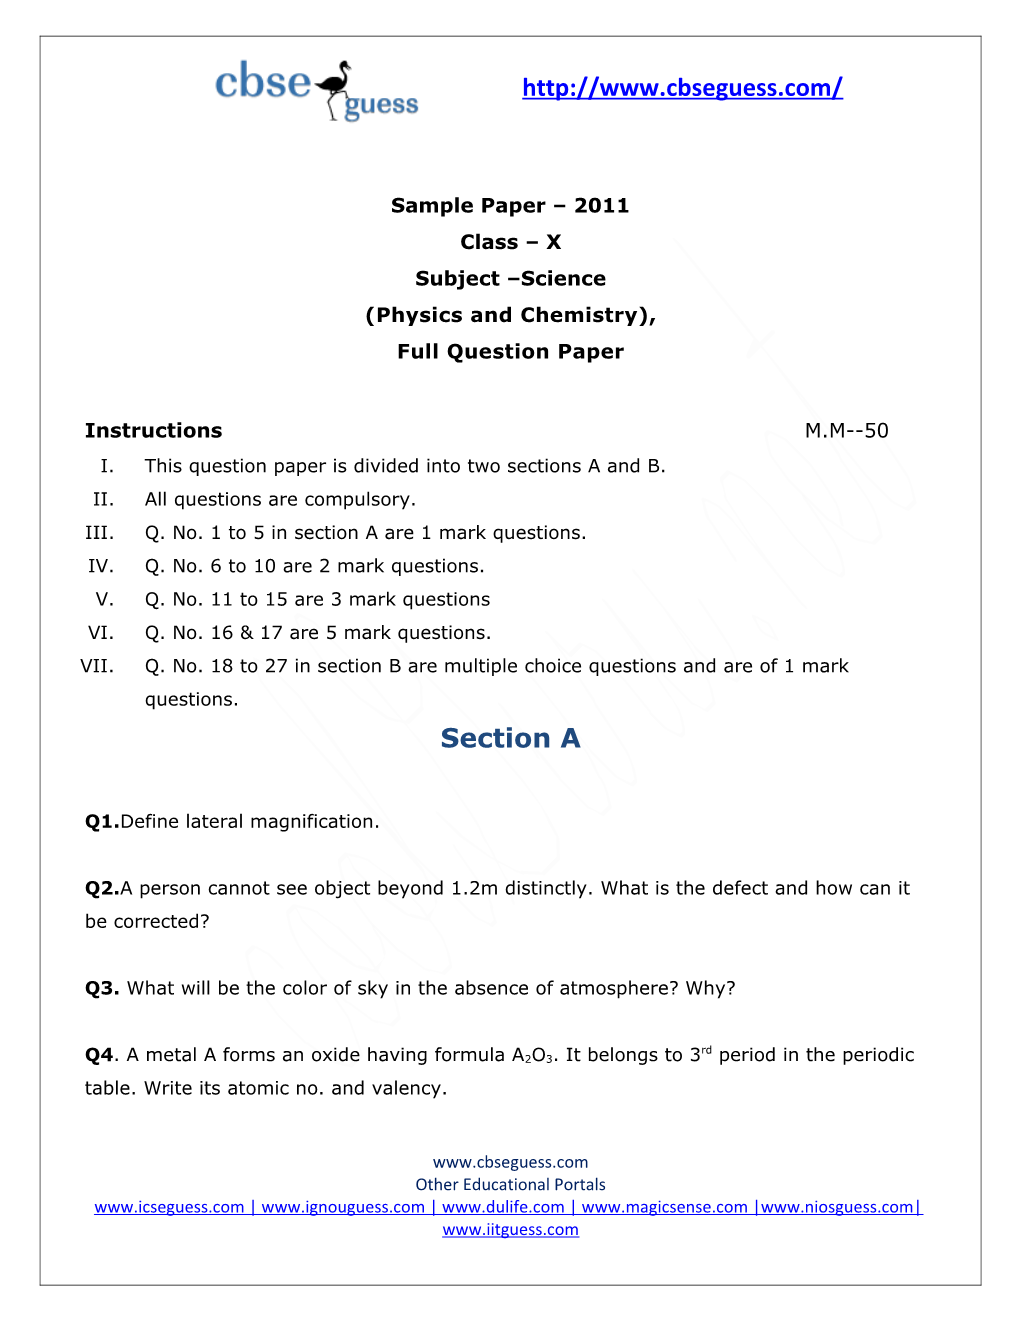 Sample Paper 2011 Class X Subject Science